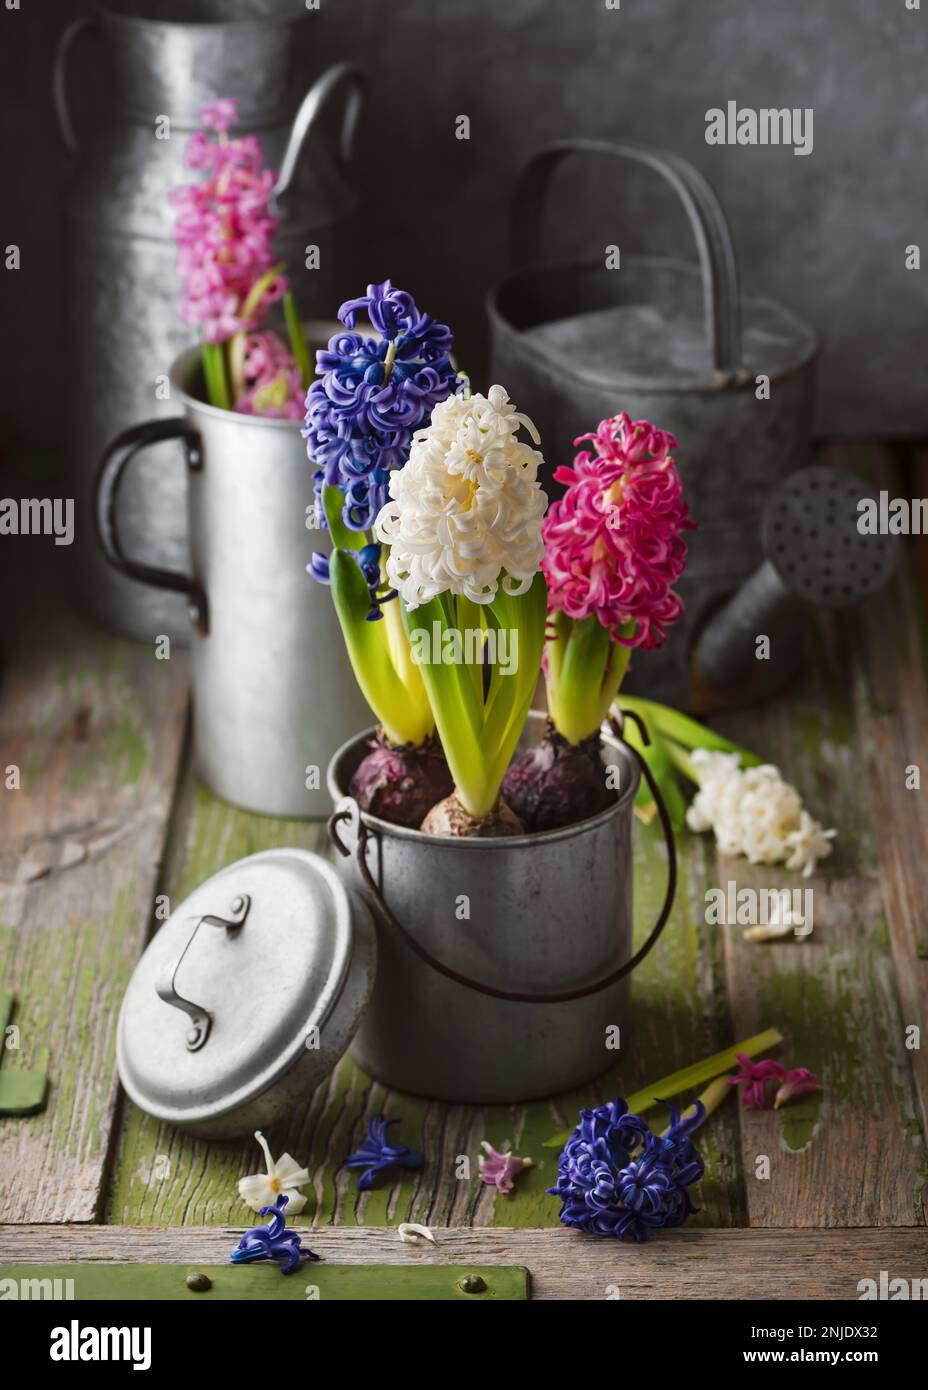 Still life with white, blue and pink hyacinthine flowers in an old metal pot on a rustic wooden background. Home decoration or floristic concept. Stock Photo